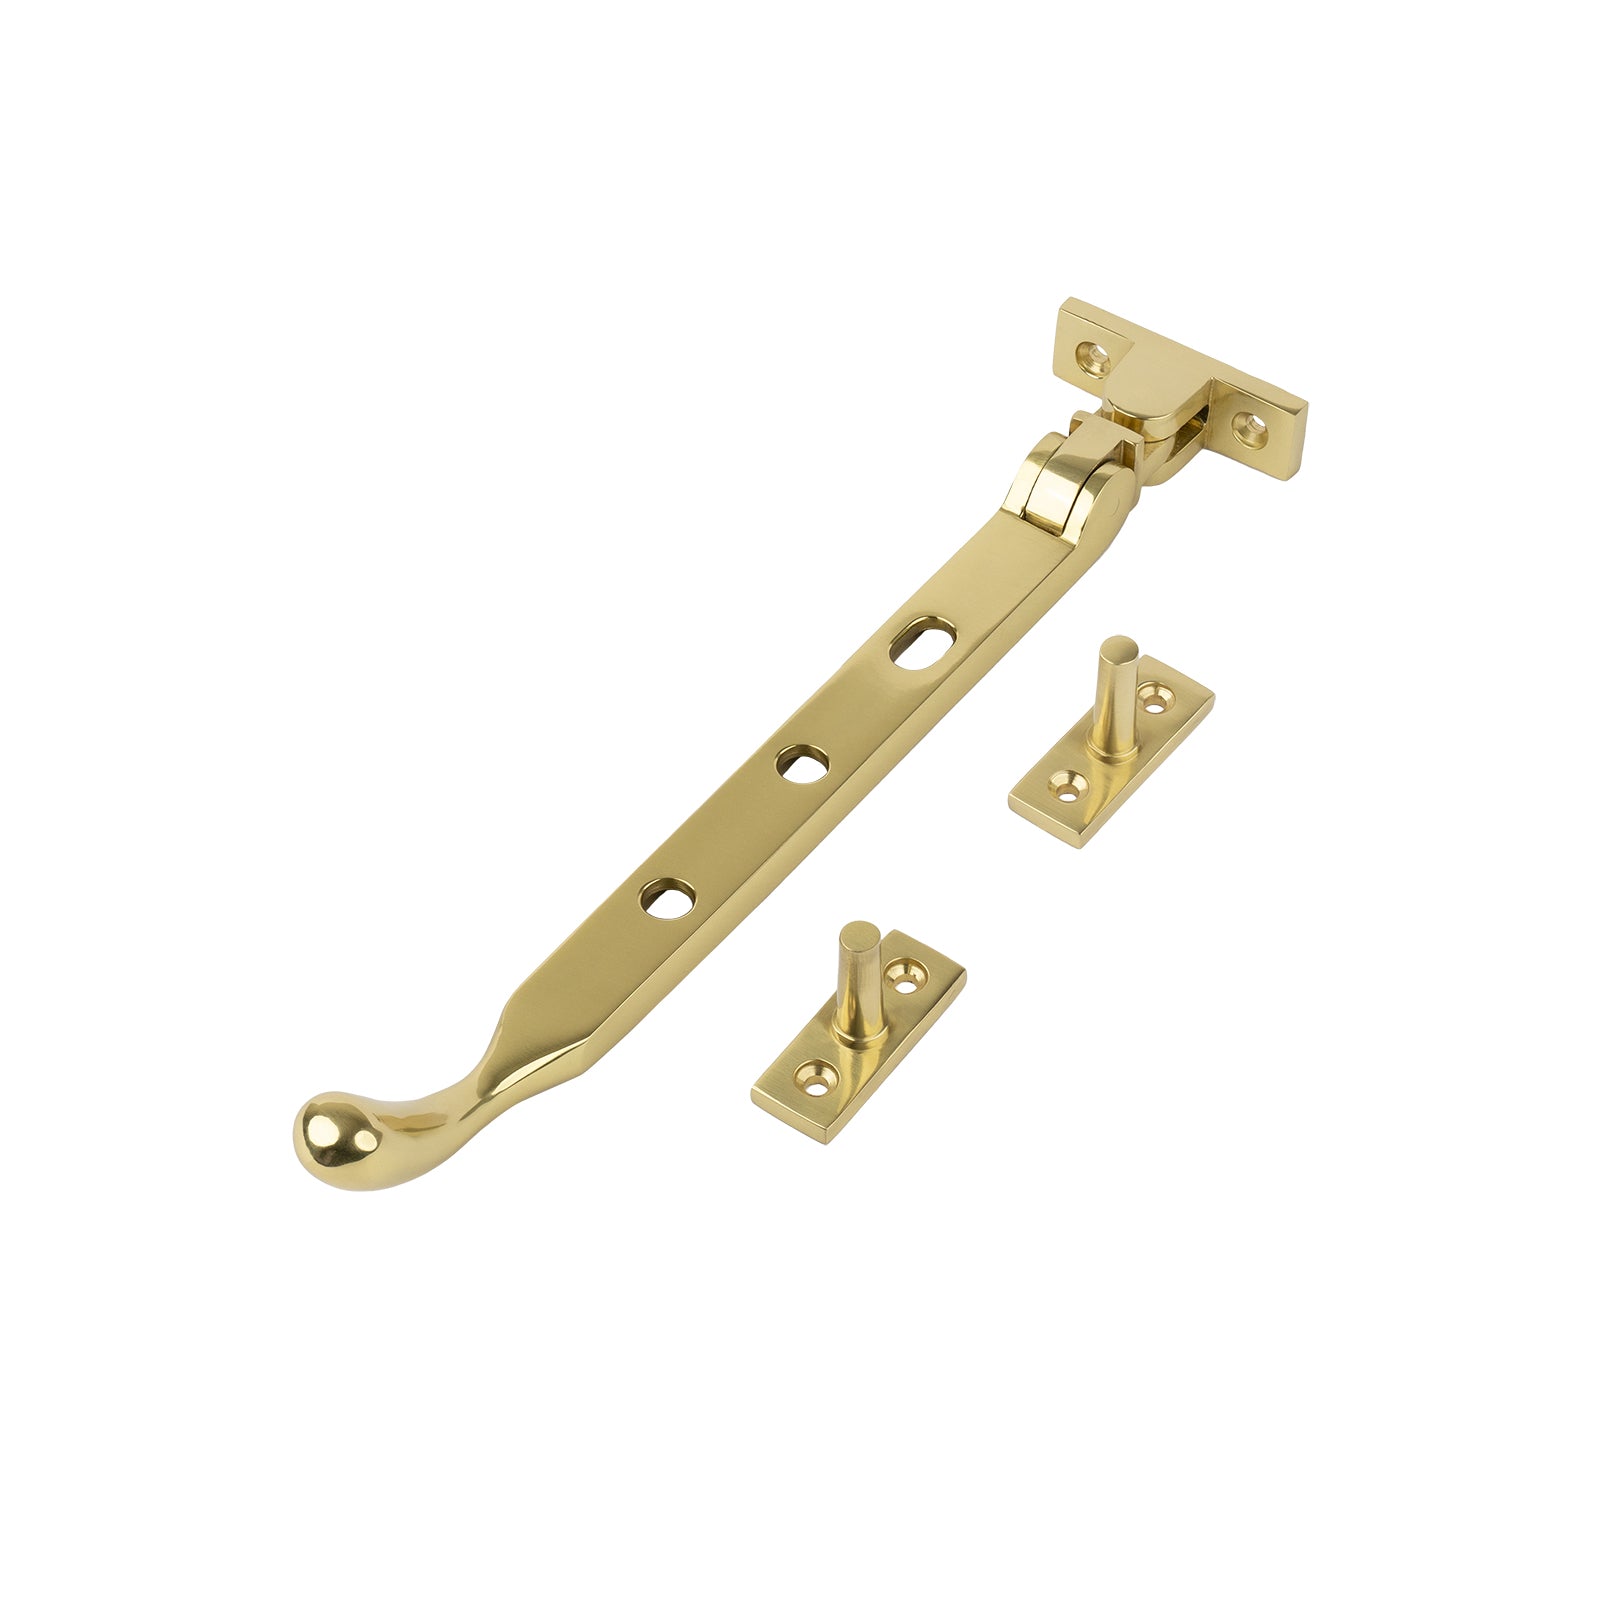 polished brass 8 inch ball end casement window stay SHOW